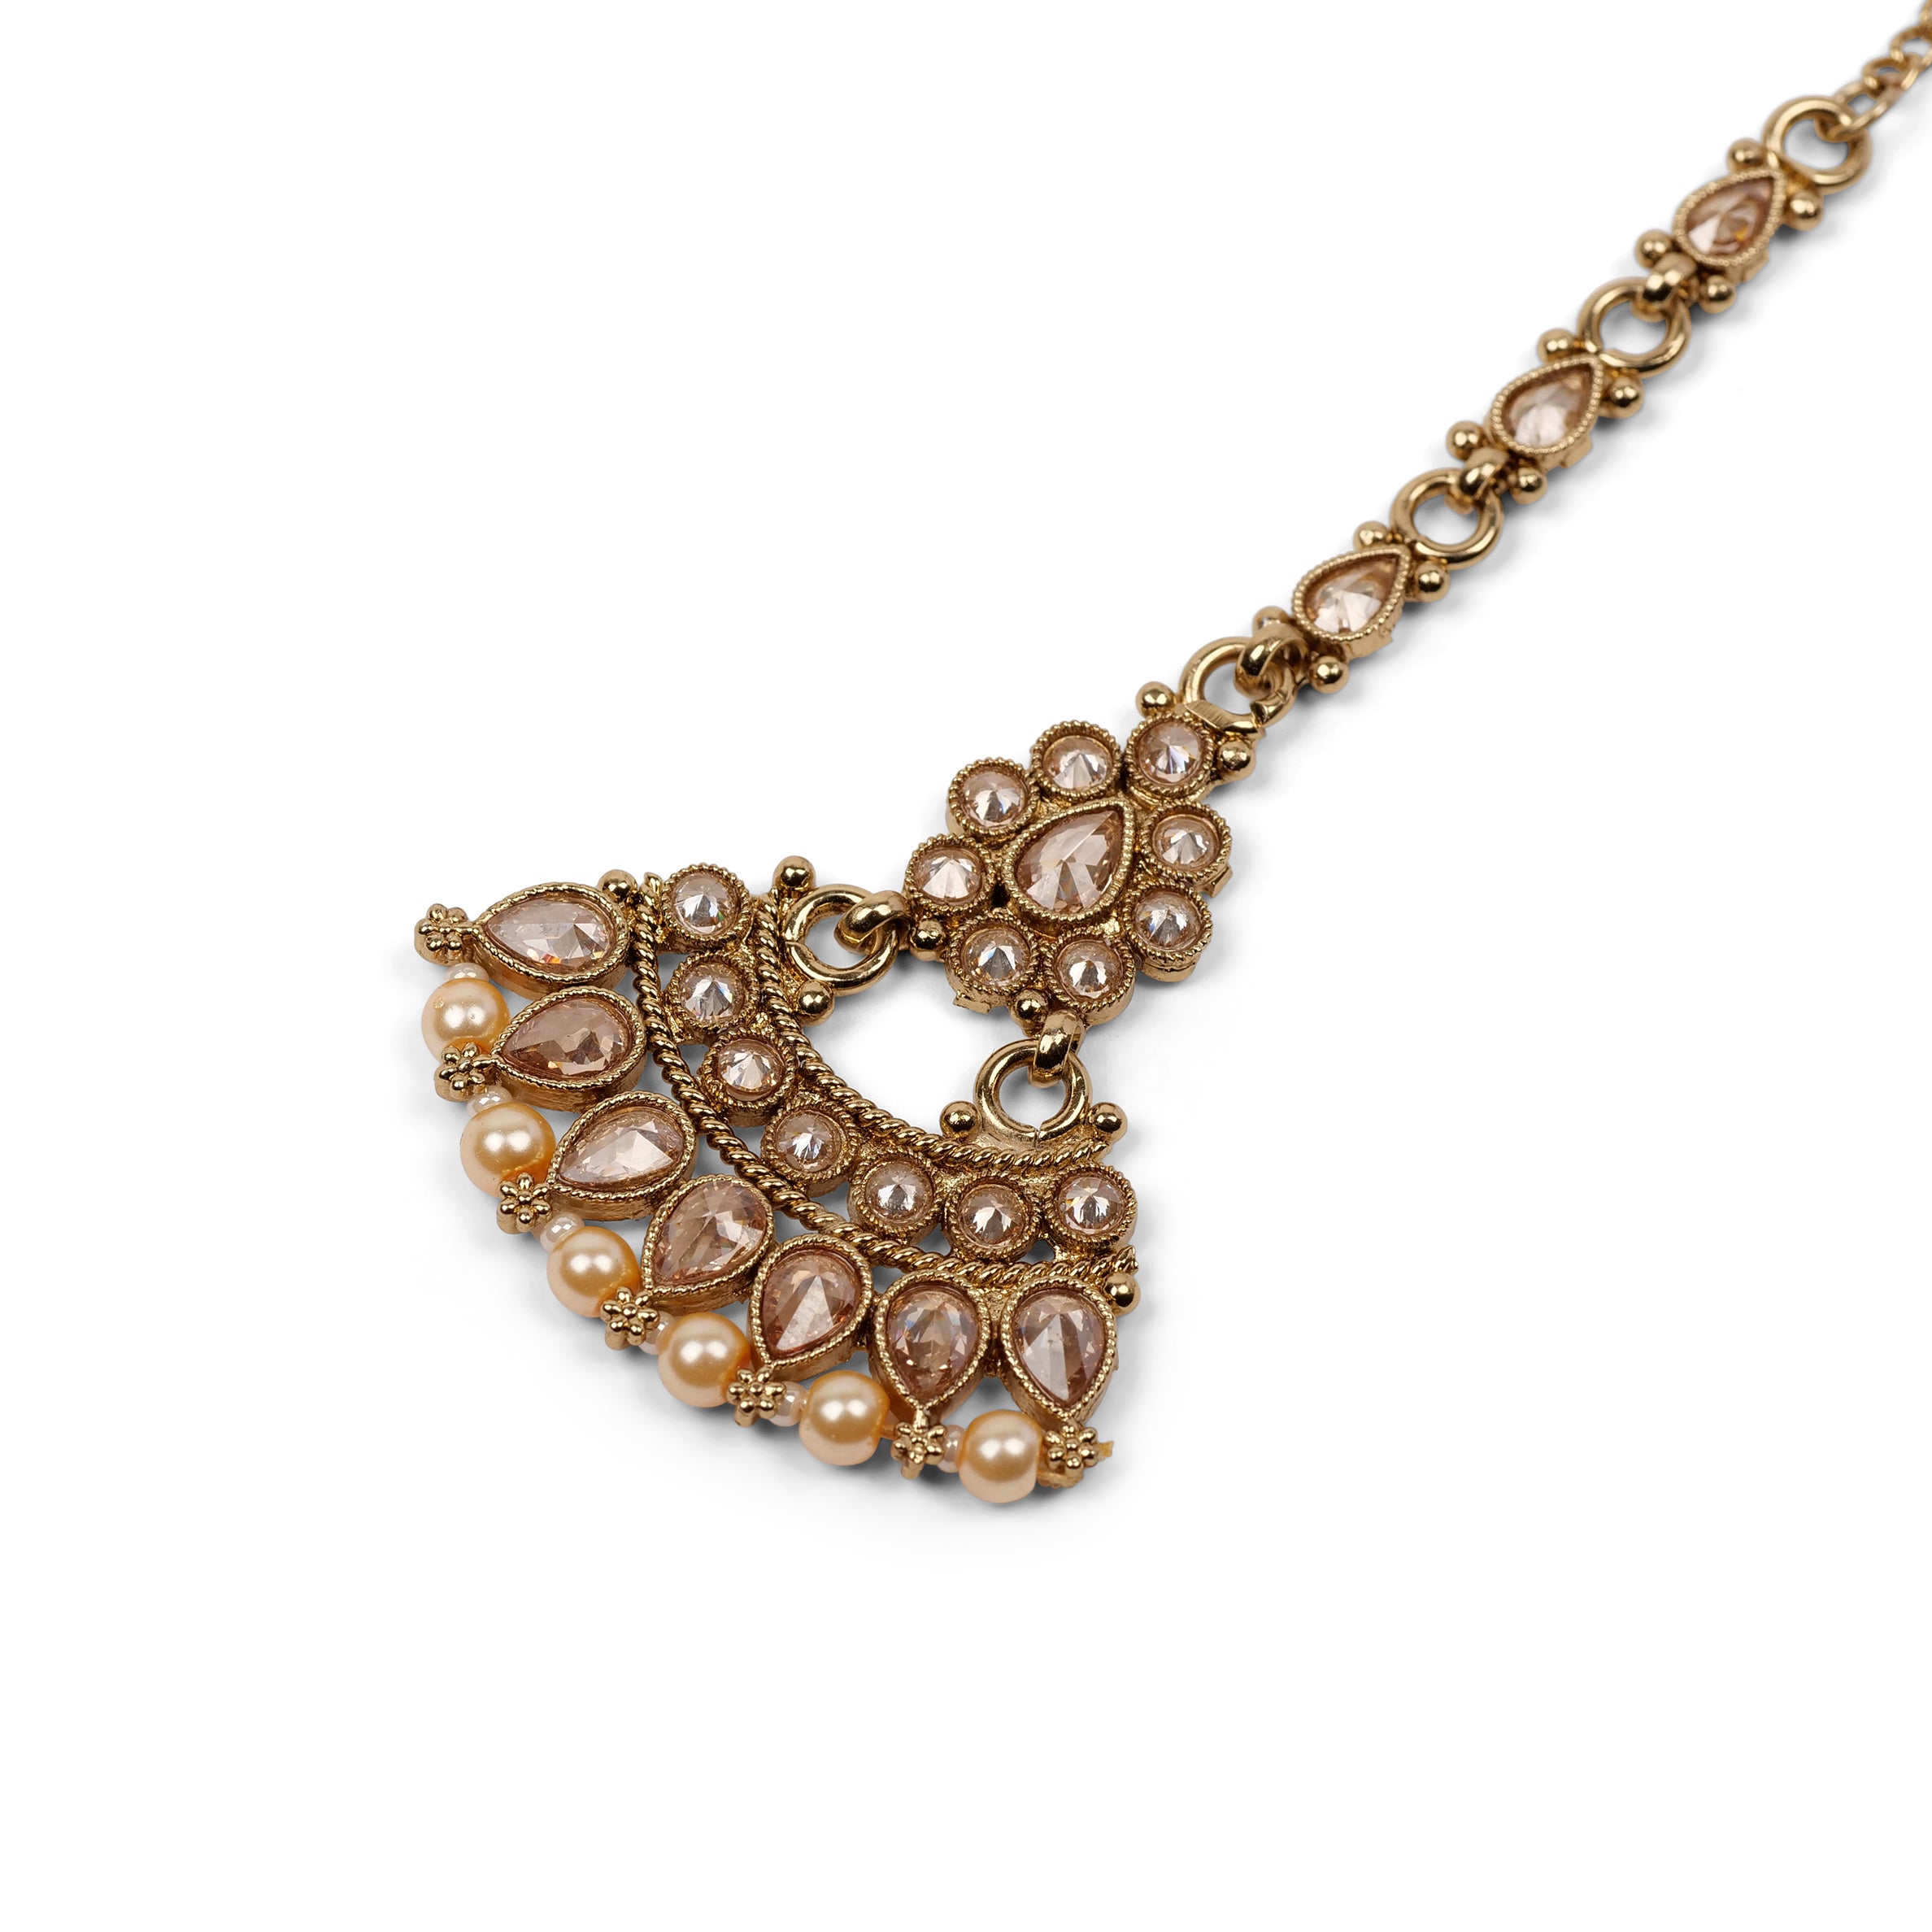 Anala Simple Necklace Set in Light Topaz and Pearl 